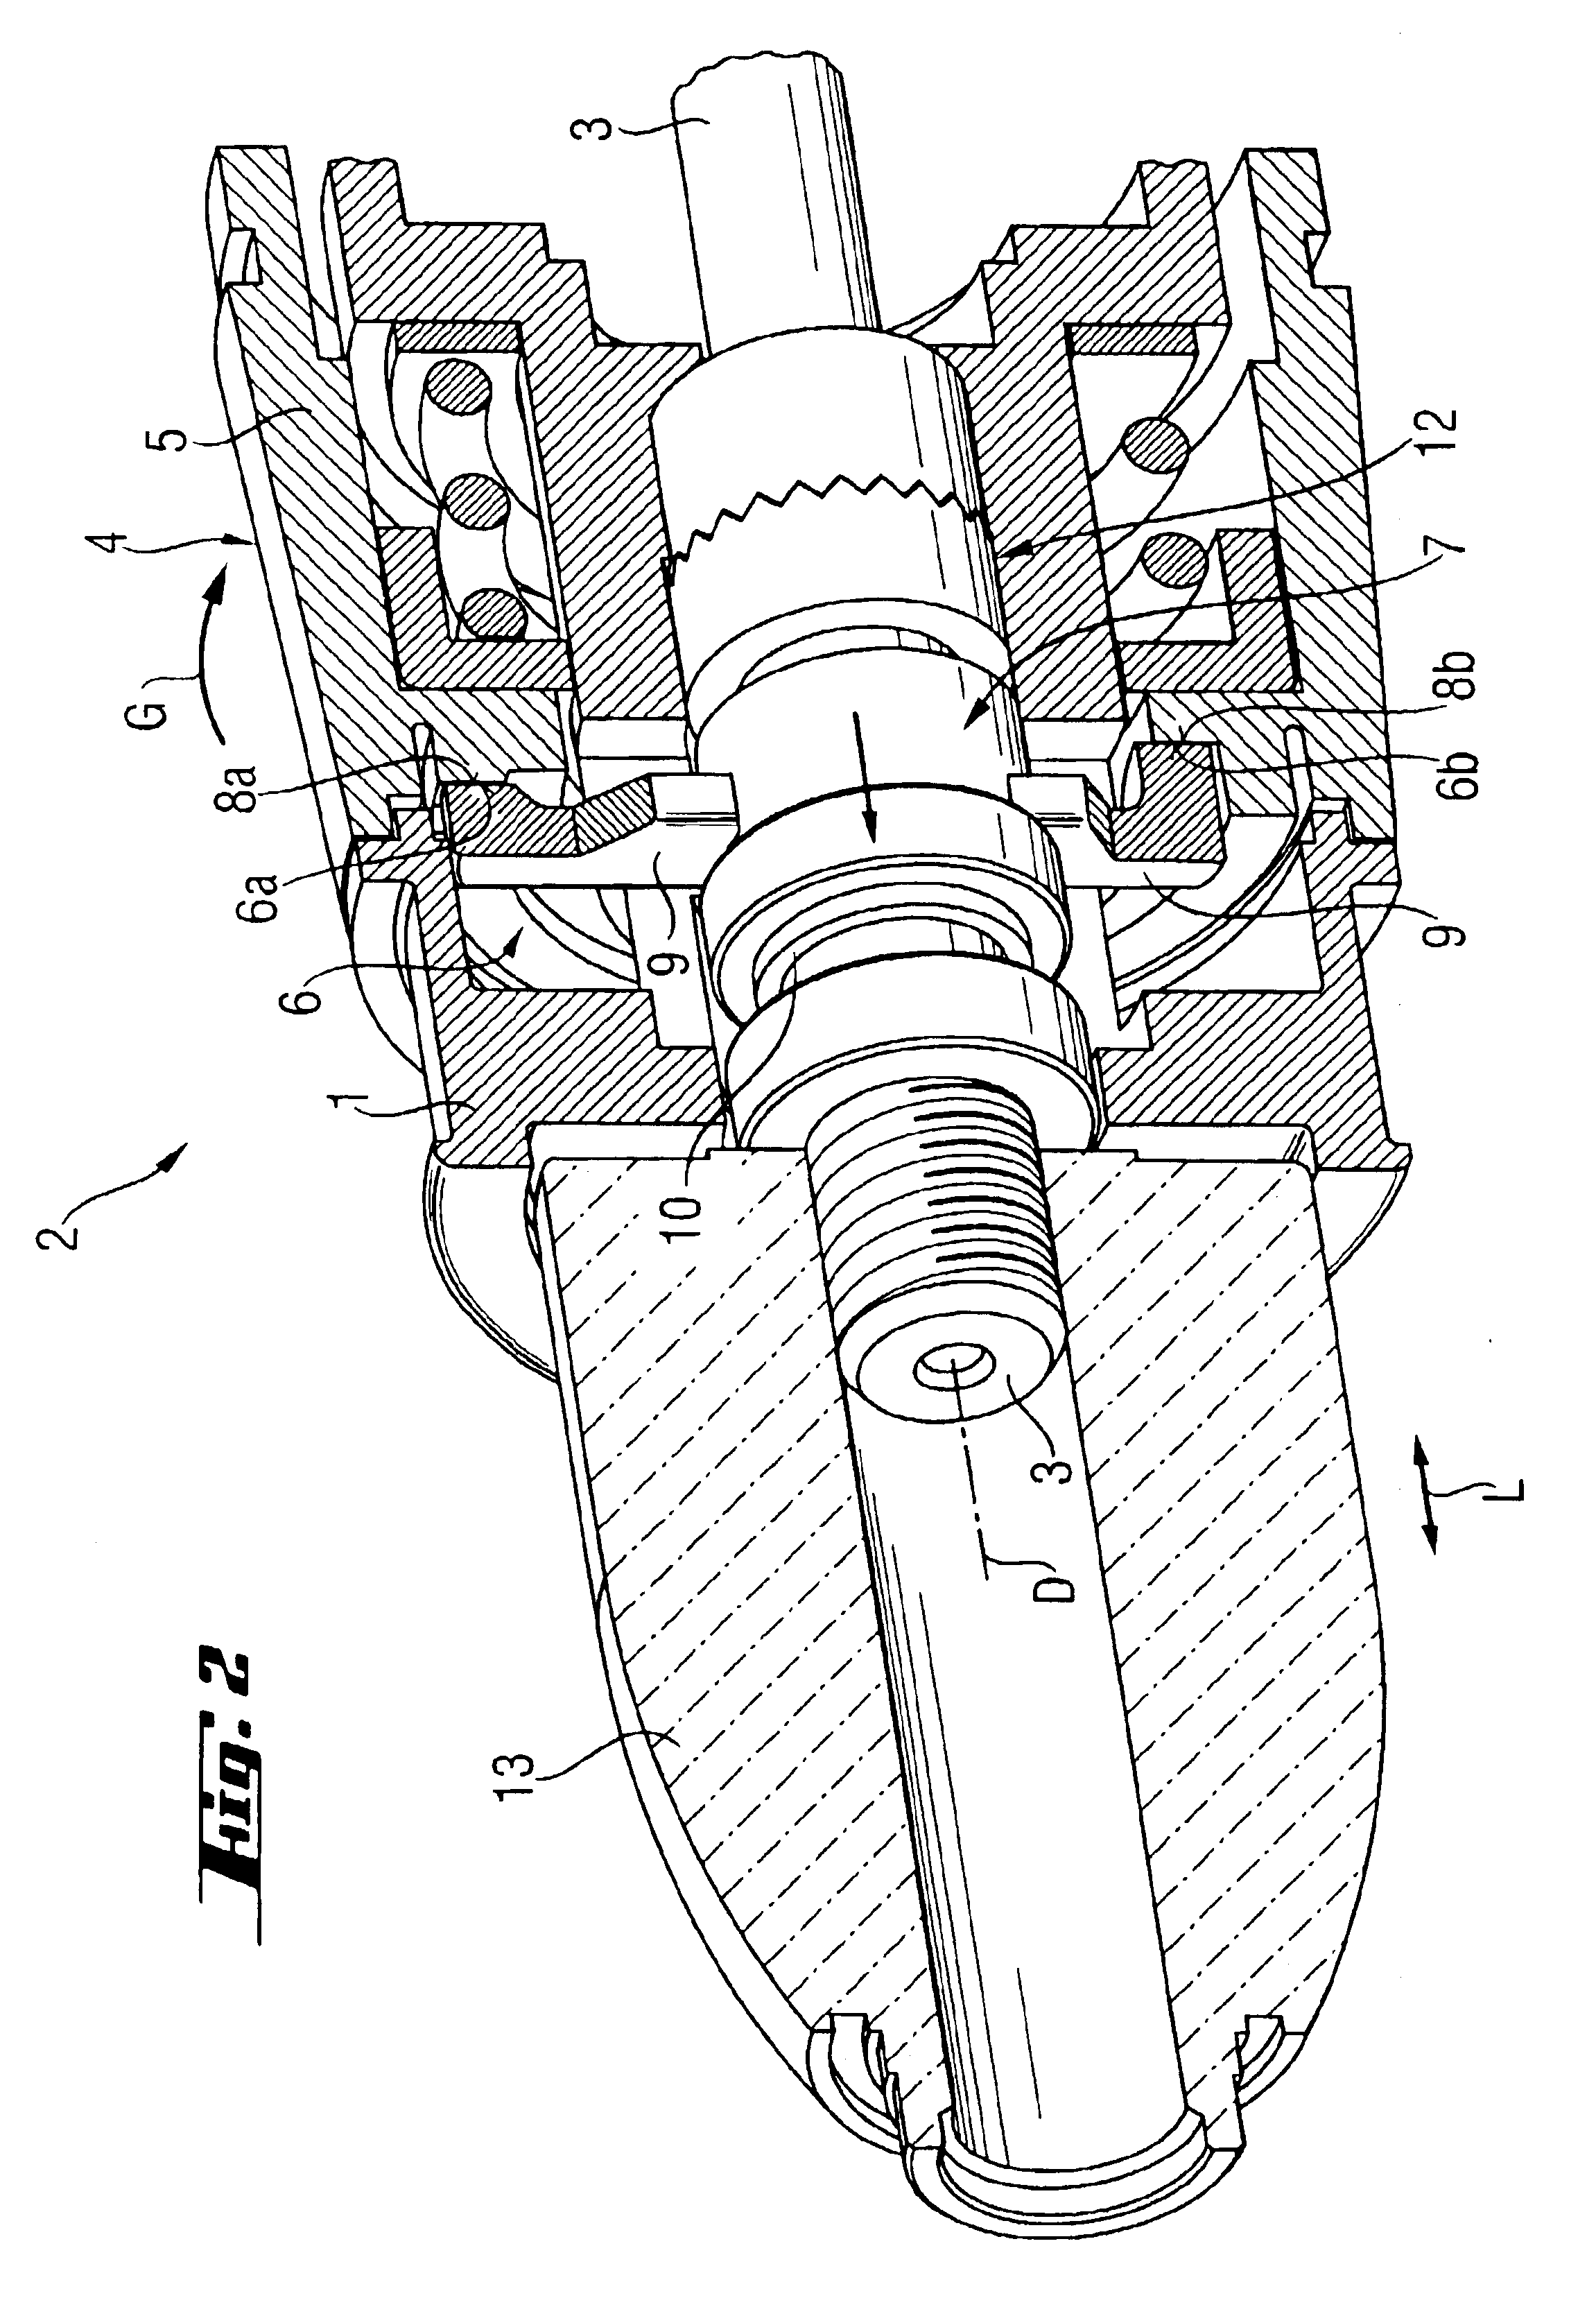 Hand-held power tool with a torque cut-off device